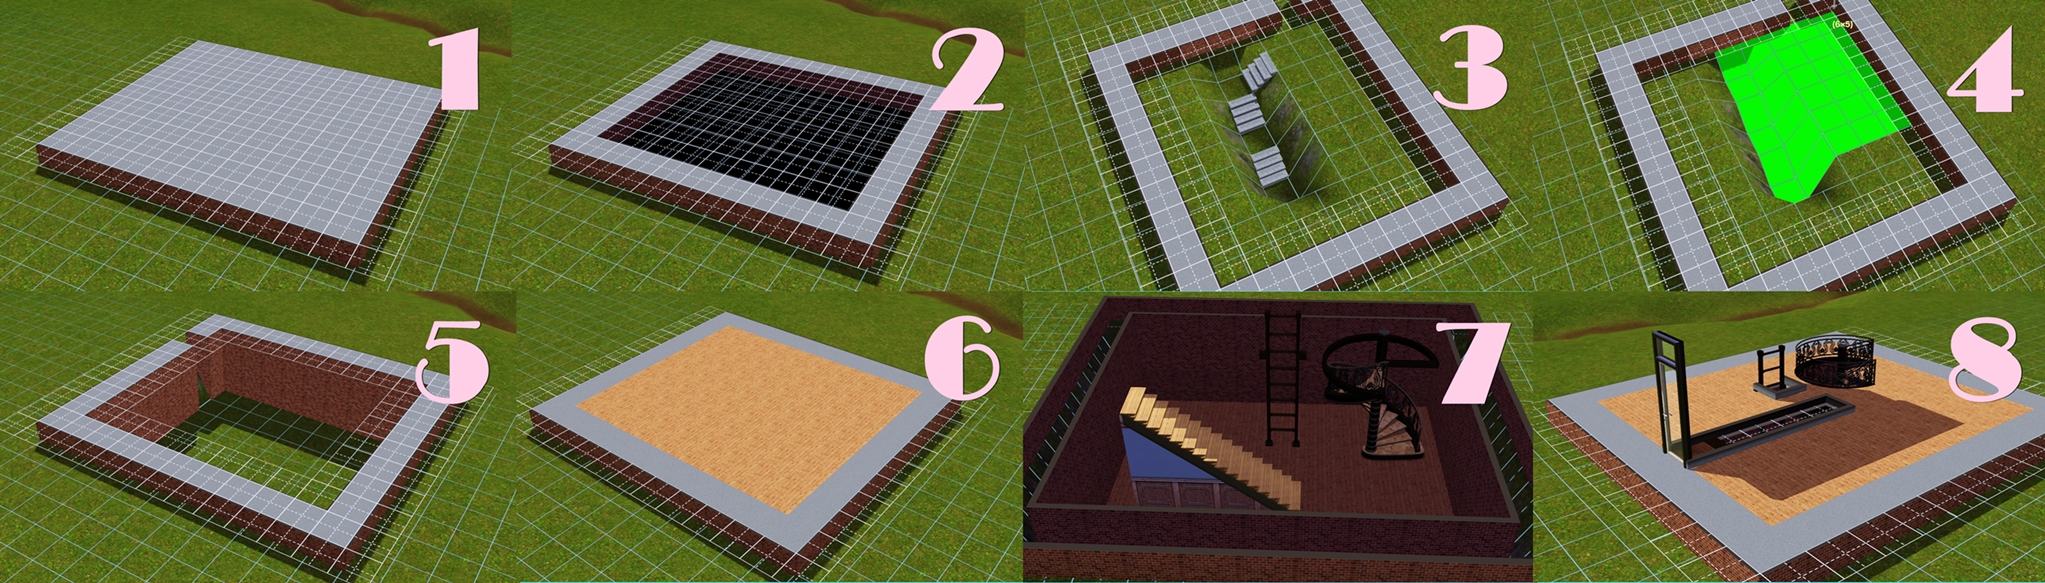 Steam Community :: Guide :: Real Basements - The Sims 3